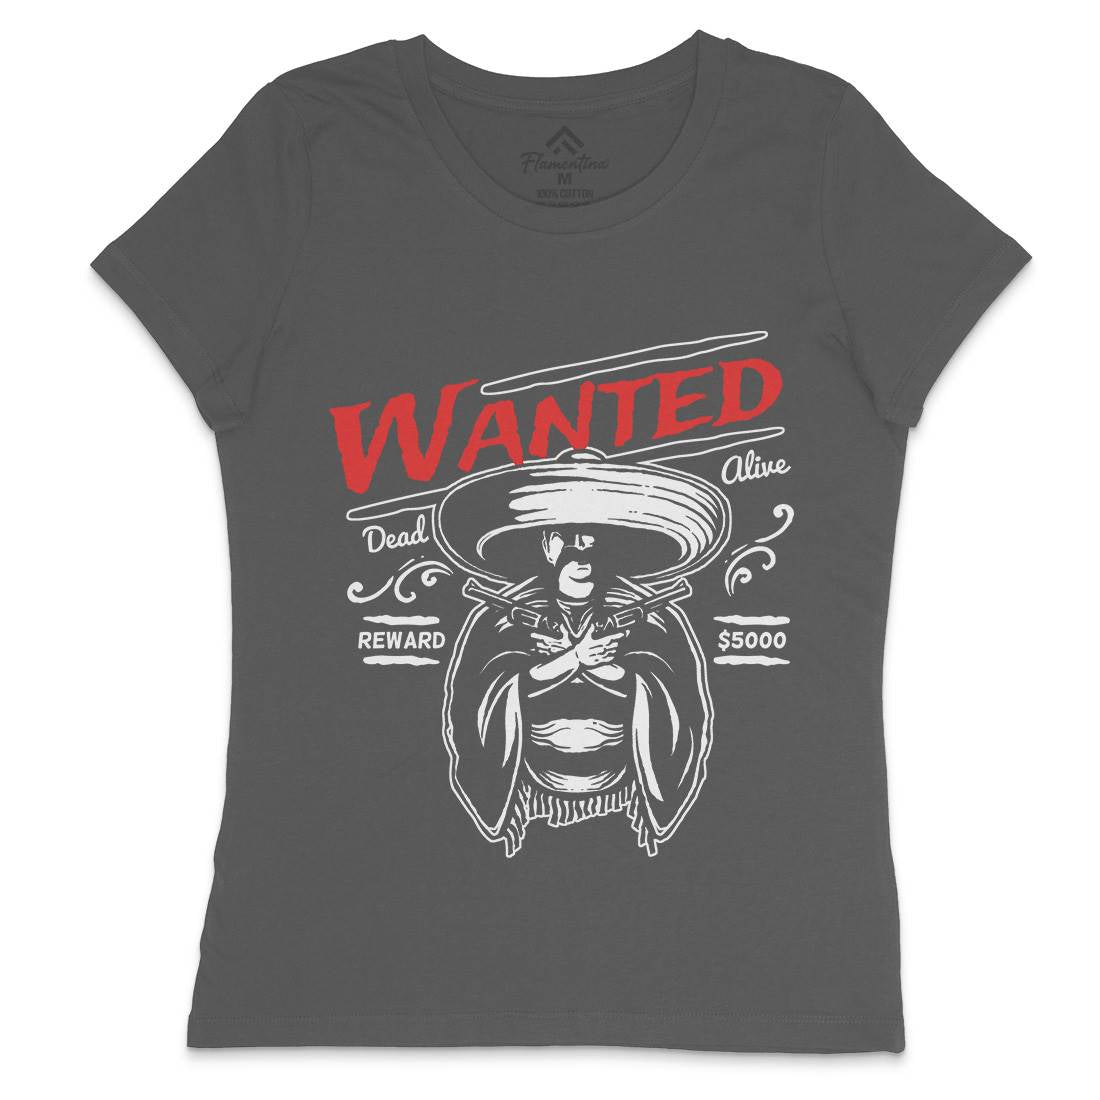 Wanted Womens Crew Neck T-Shirt American A391